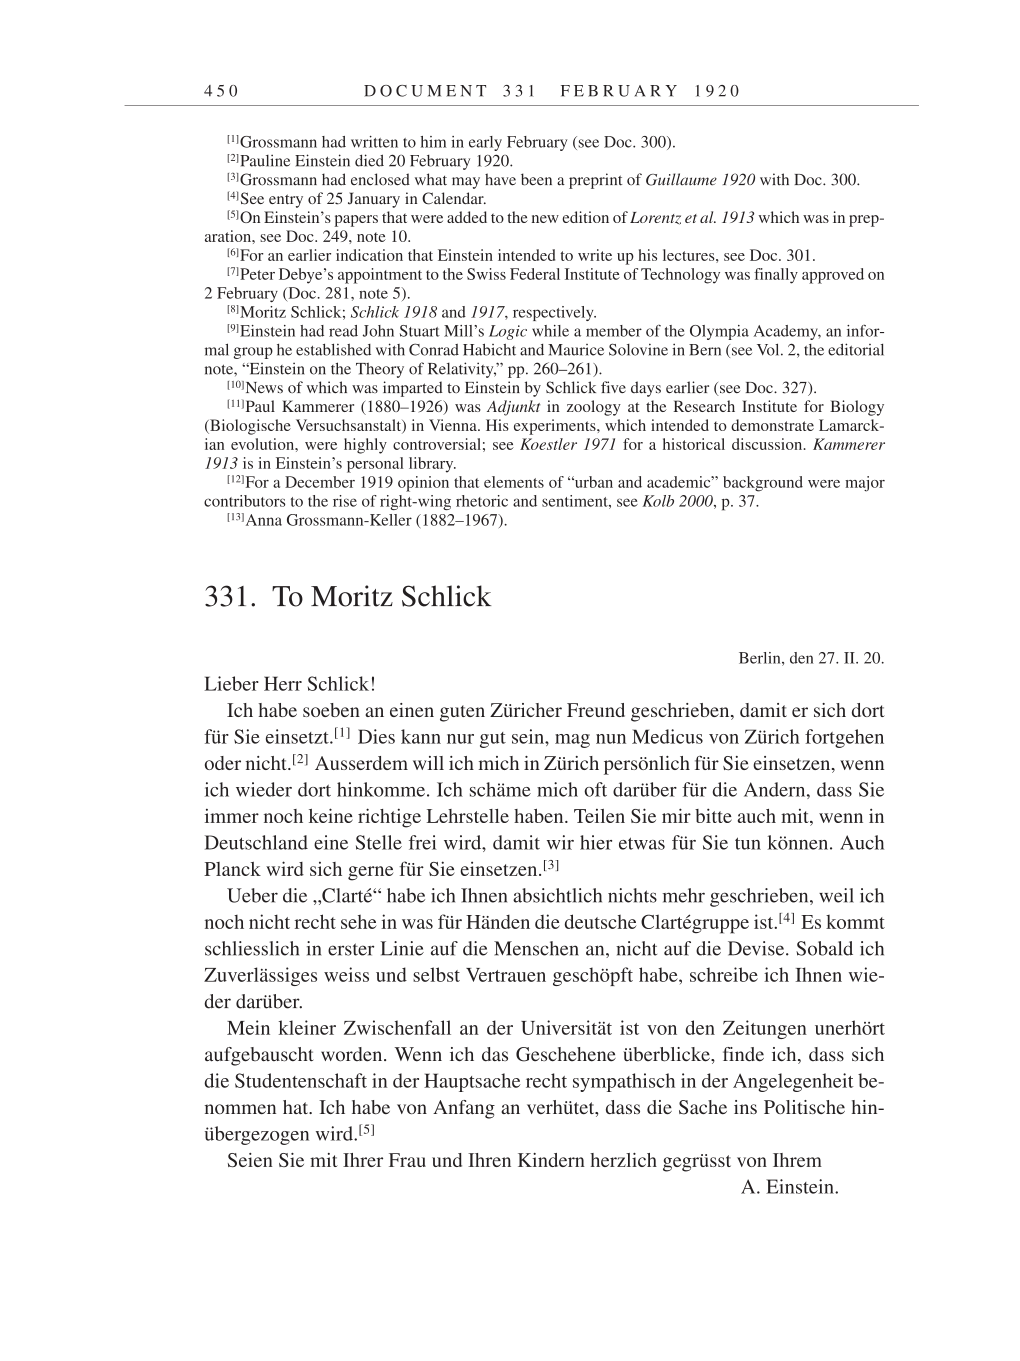 Volume 9: The Berlin Years: Correspondence January 1919-April 1920 page 450